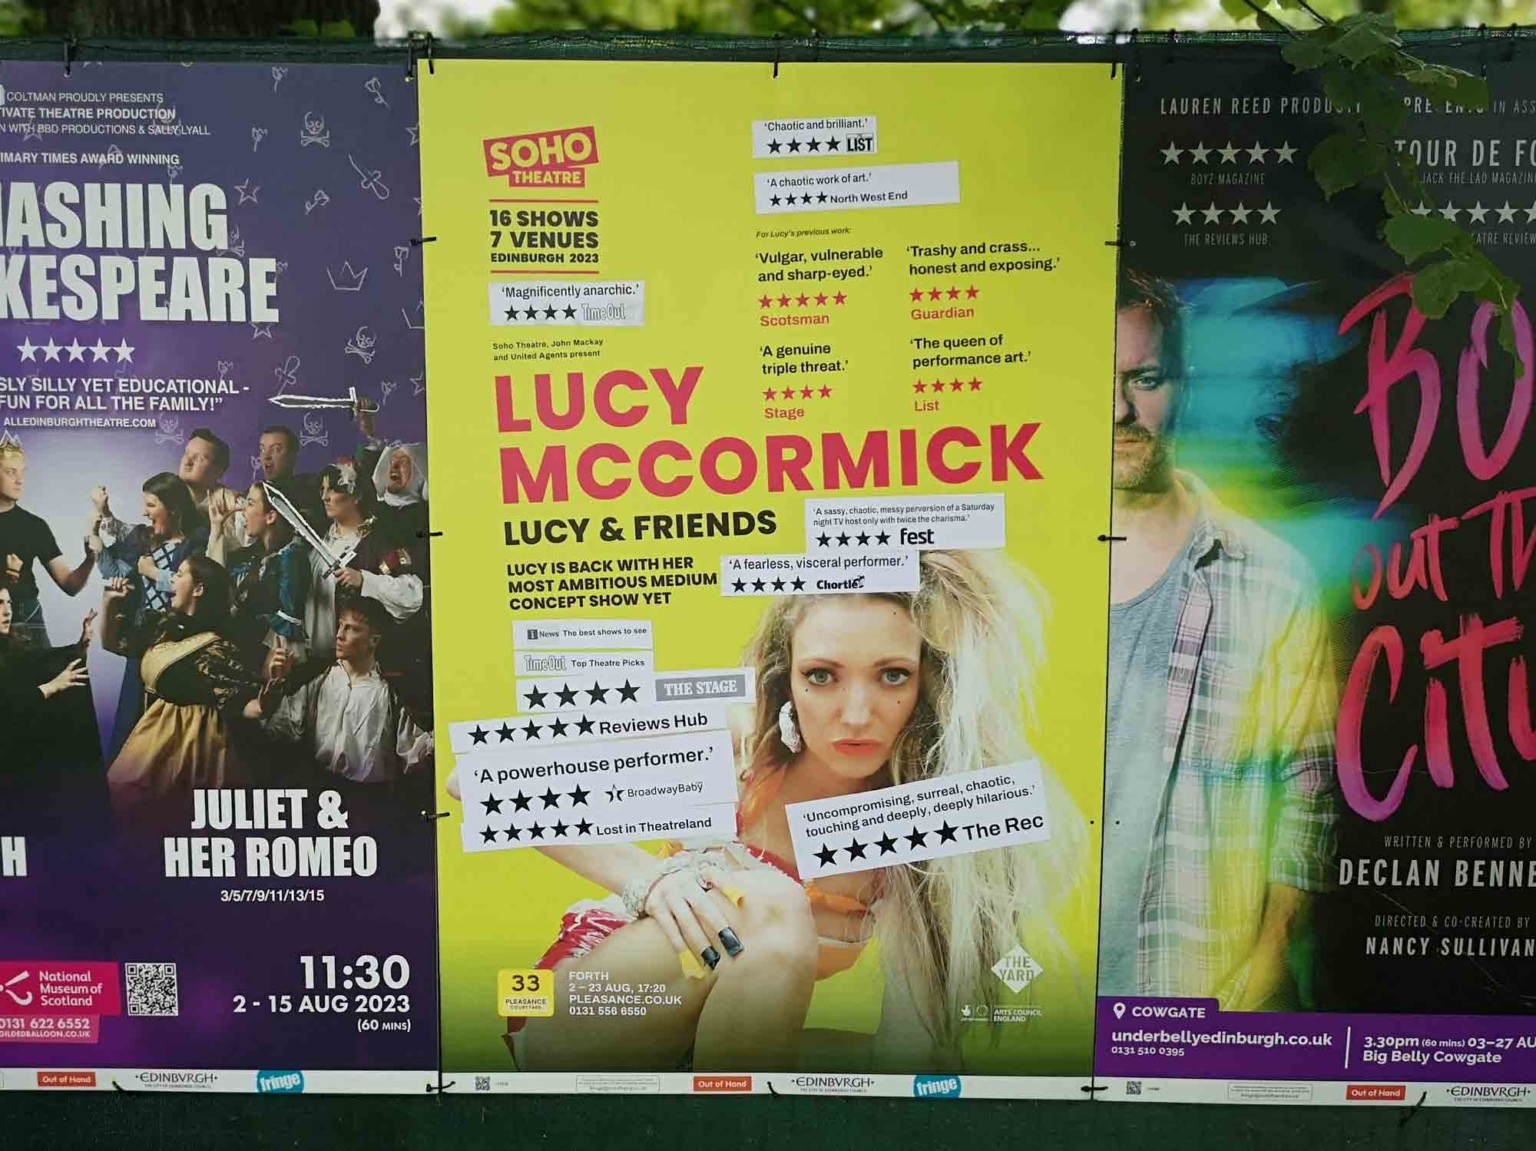 Poster for Lucy & Friends